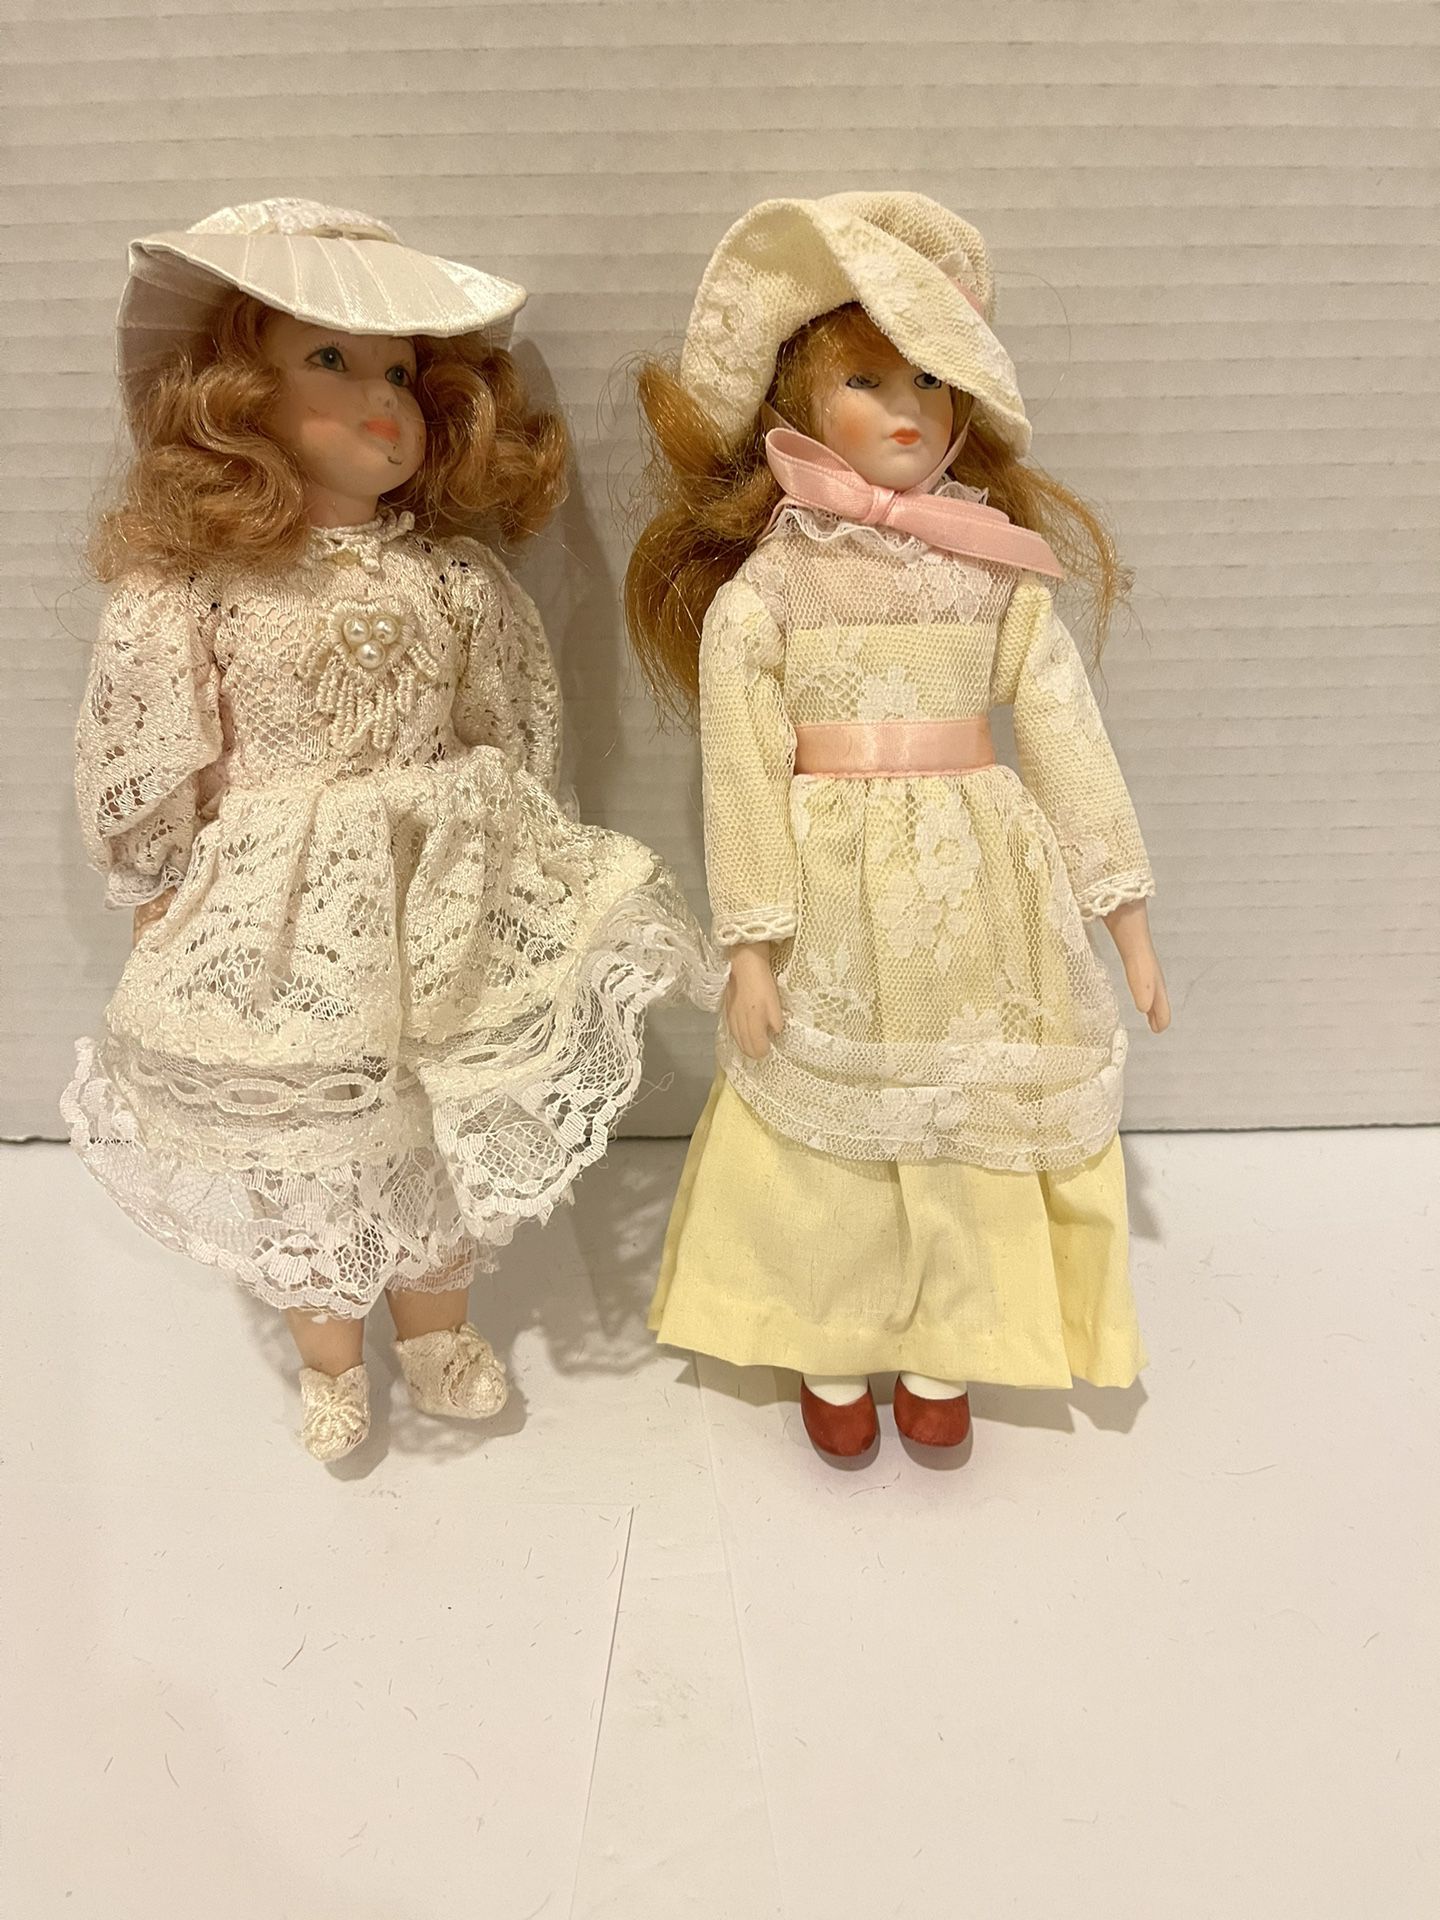 Two porcelain 8” dolls with nice outfits and hats.  The one with the yellow dress is made by Russ. 